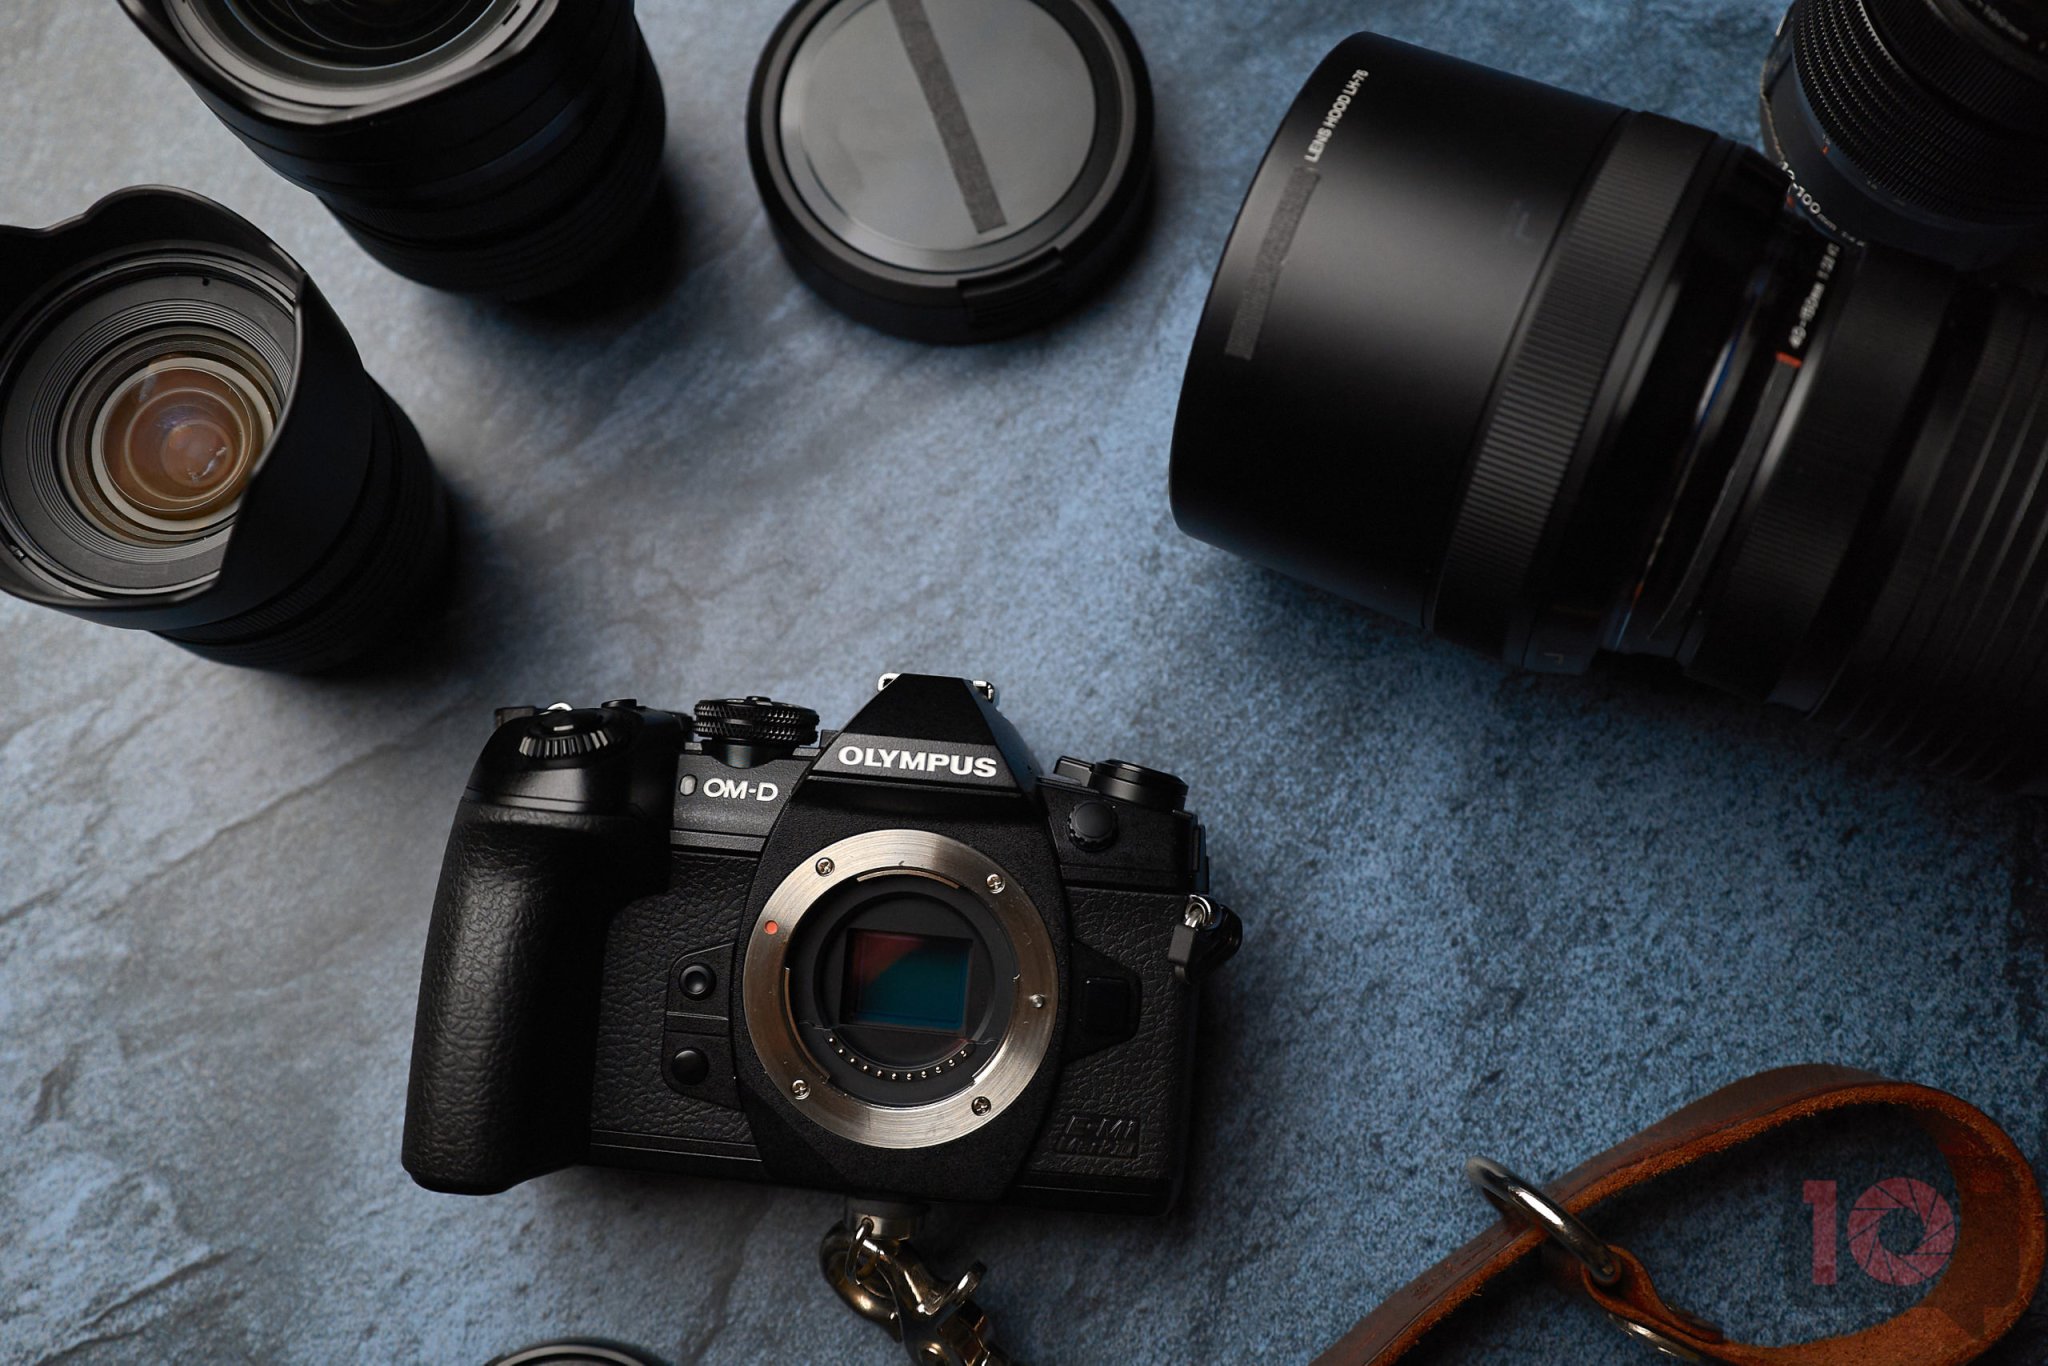 Review: Olympus OMD EM1 III (A Travel Photographer's Imperfect Gem)